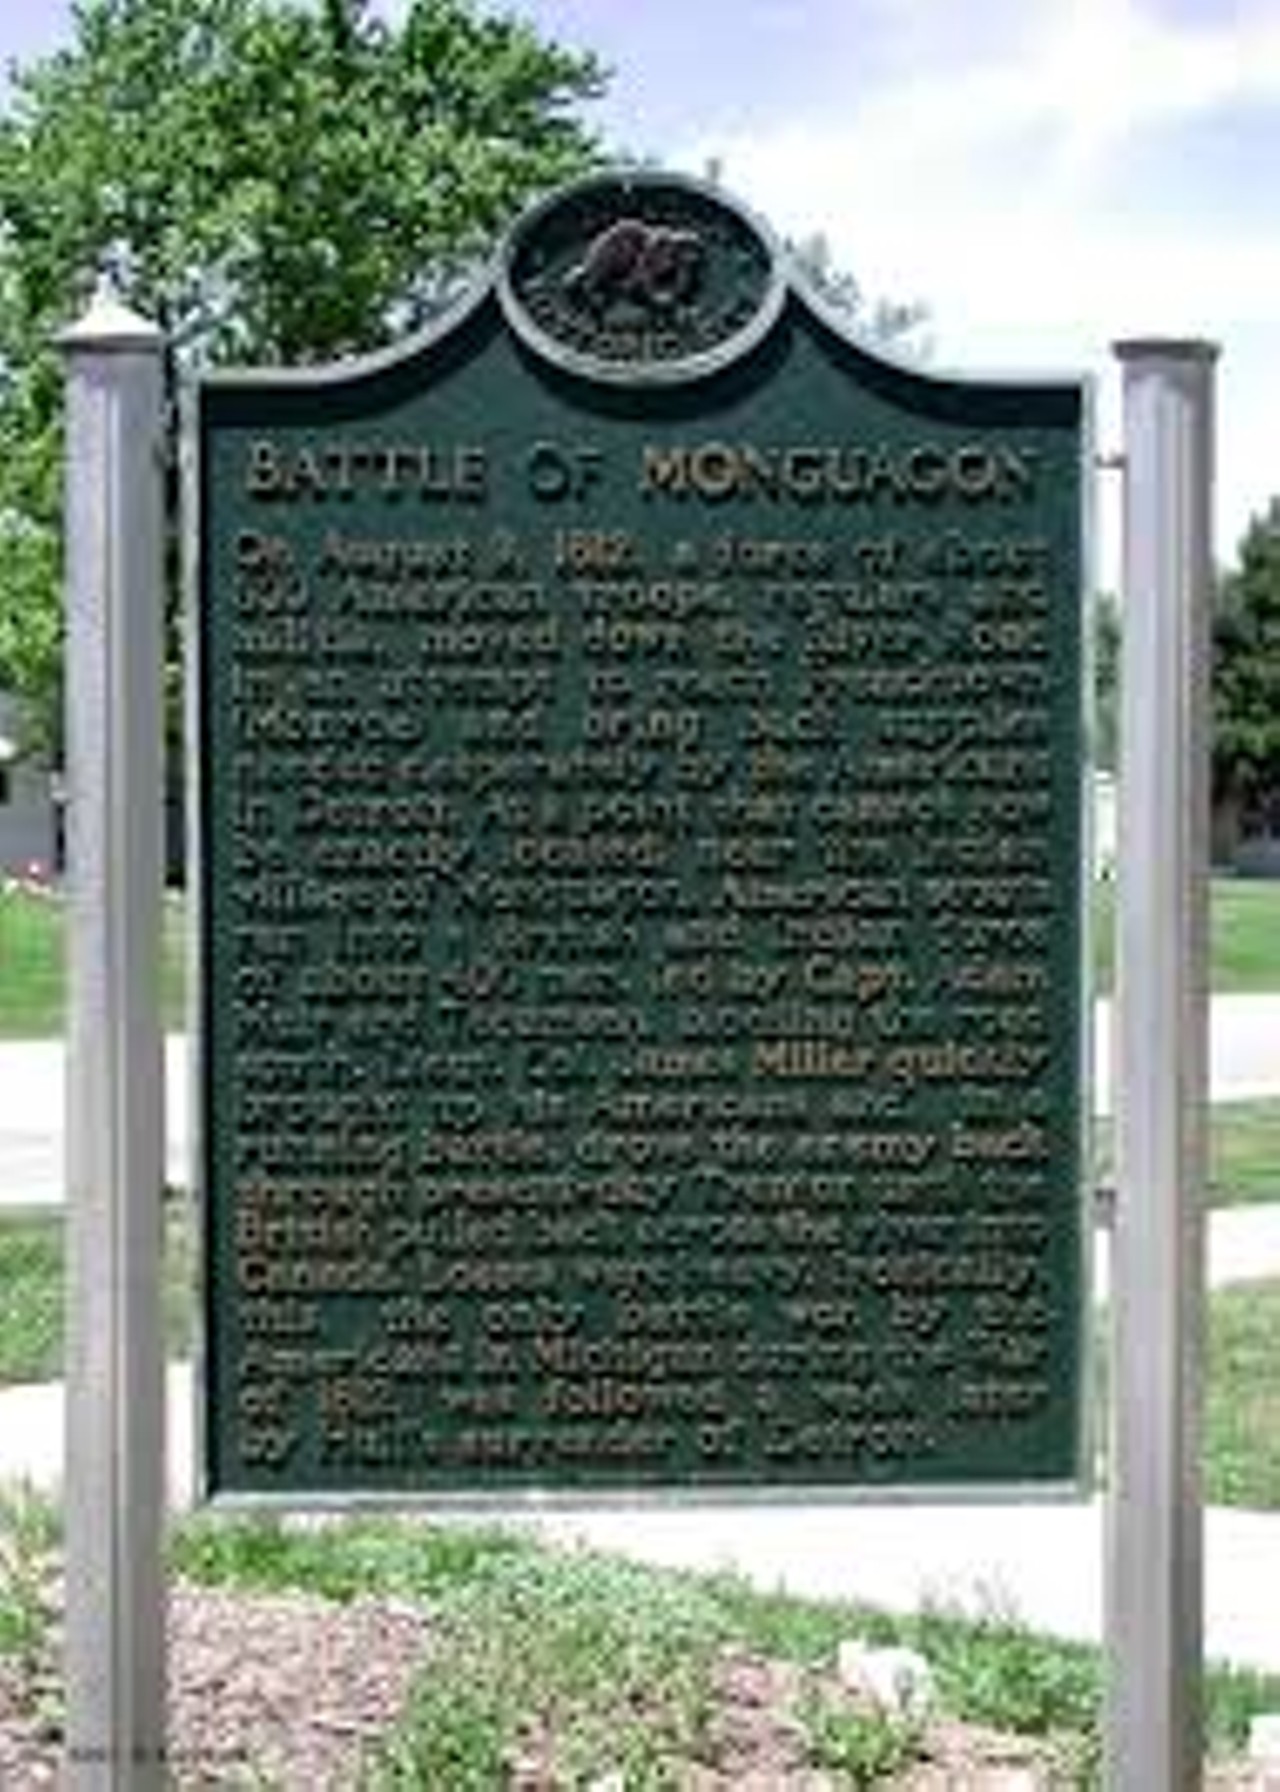 The Monguagon Ghost
There’s a lost Indian village in Trenton, near the corner of West Jefferson and Slocum, called Monguagon. This is the site of America’s only Michigan victory in the war of 1812. The ghost is the result of a British soldier called Muir who was shot in the head and killed. That same night, a bloody apparition showed up in his girlfriend’s bedroom and basically said, “Do me a favor sweetheart, bury my corpse before the other guys get their mitts on it.” From time to time, Muir pops up just to make himself known.